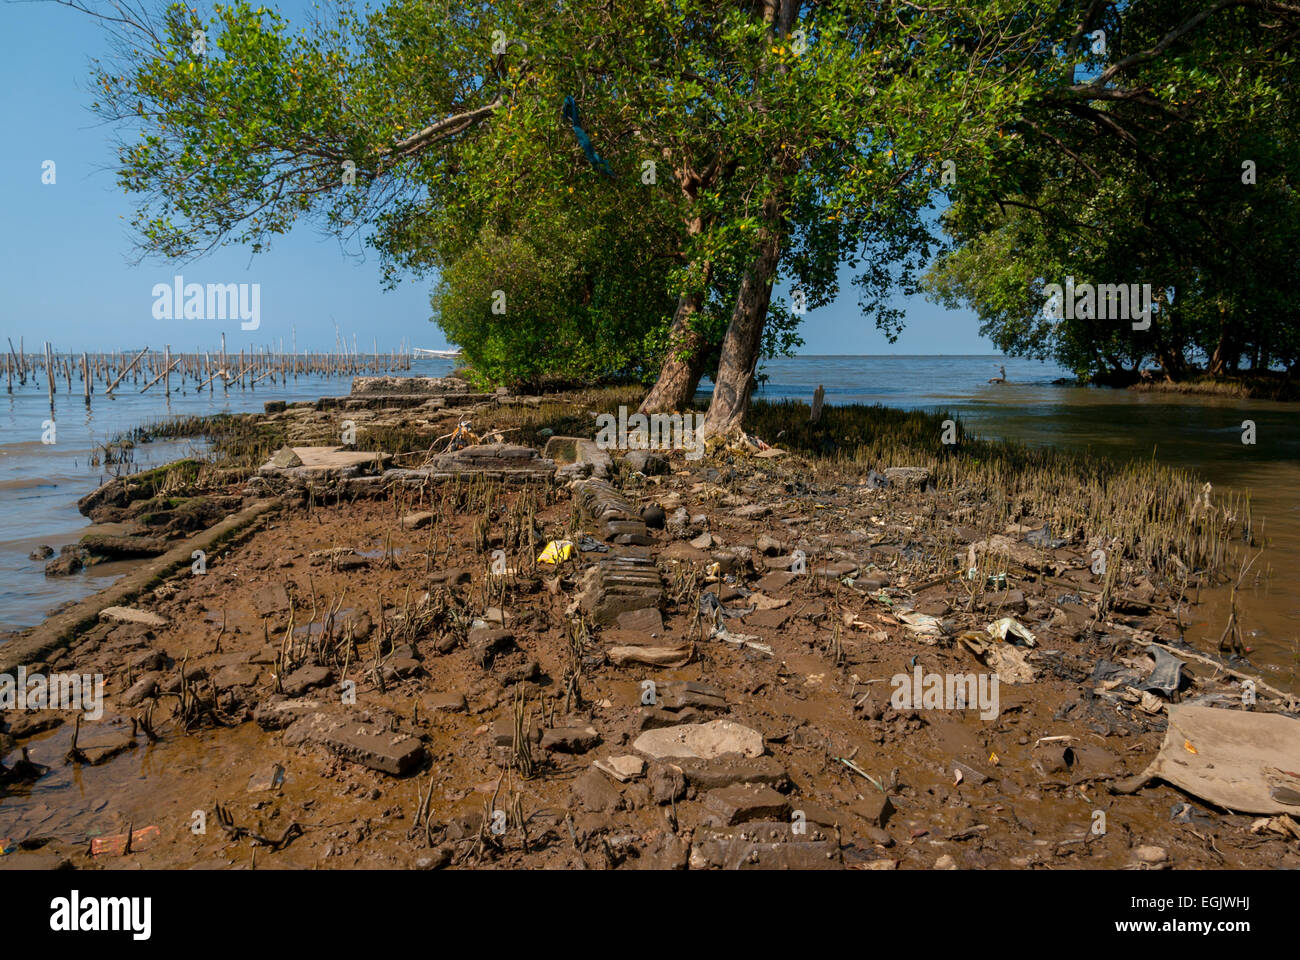 Mangrove trees and the remaining of a man-made structure on a coastal landscape suffering from coastal erosion in Kamal Muara, Jakarta, Indonesia. Stock Photo